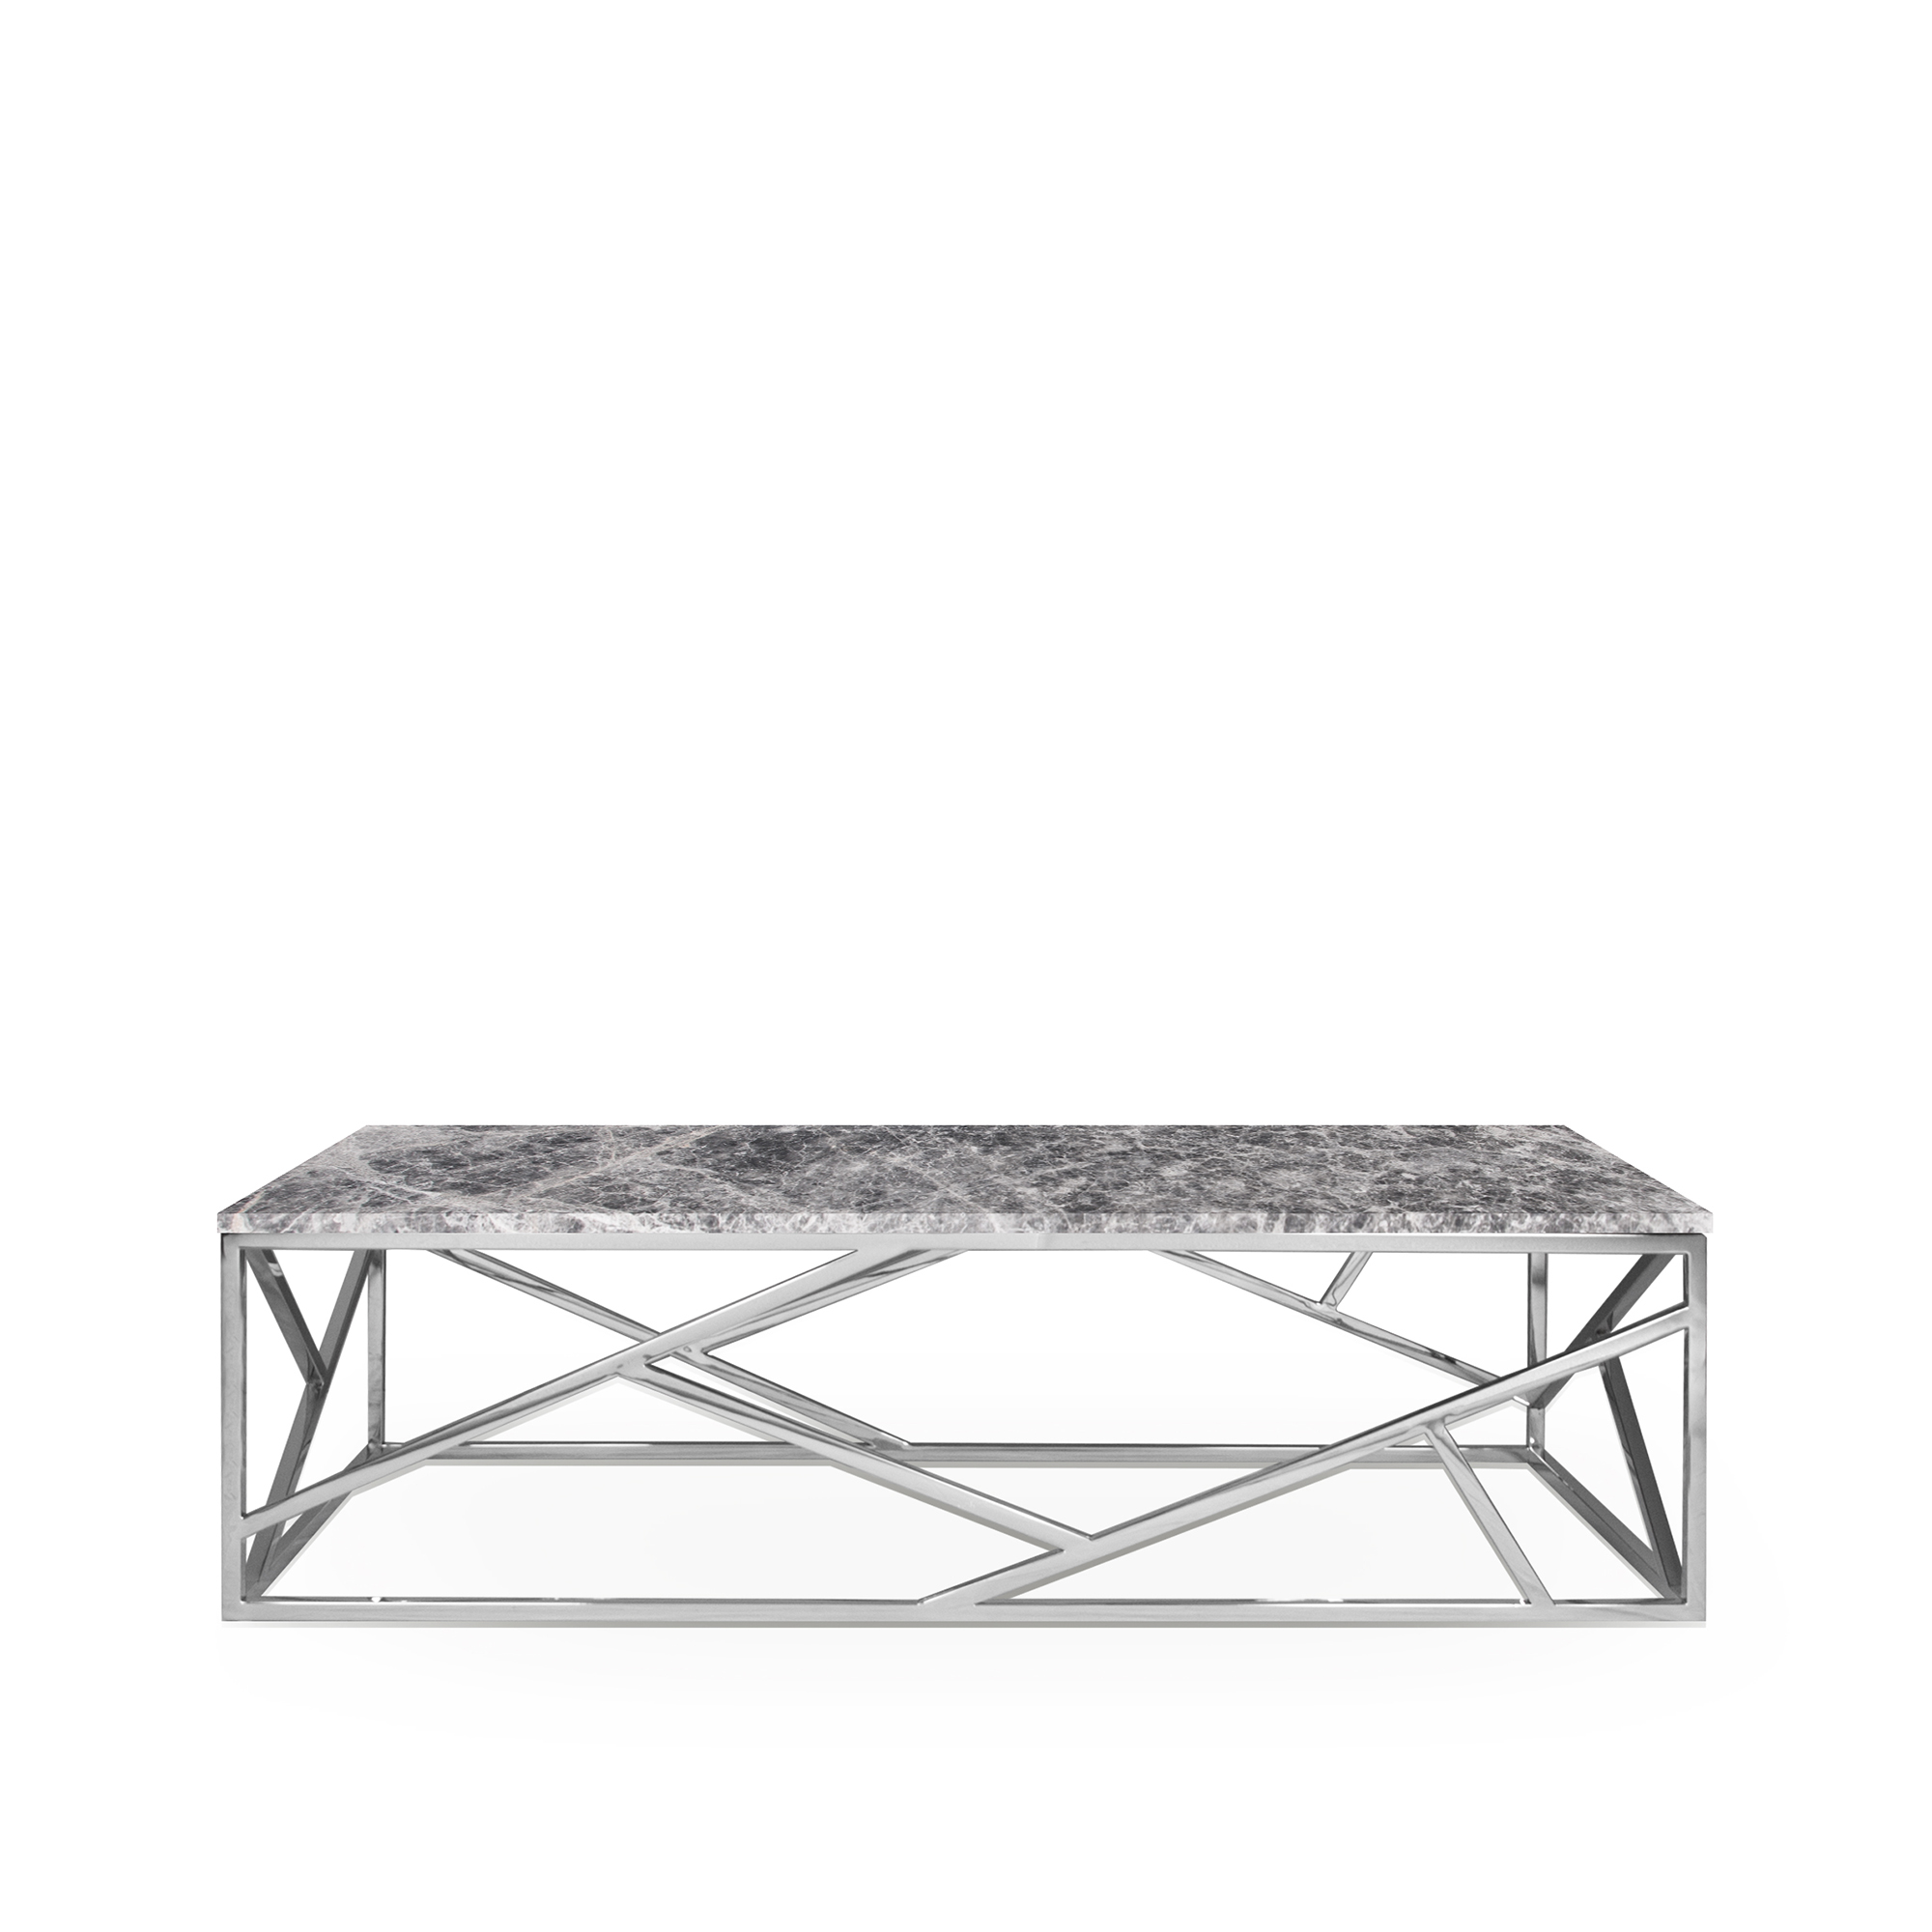 Miro C | Art Series | Decasa Marble Marble Dining Table